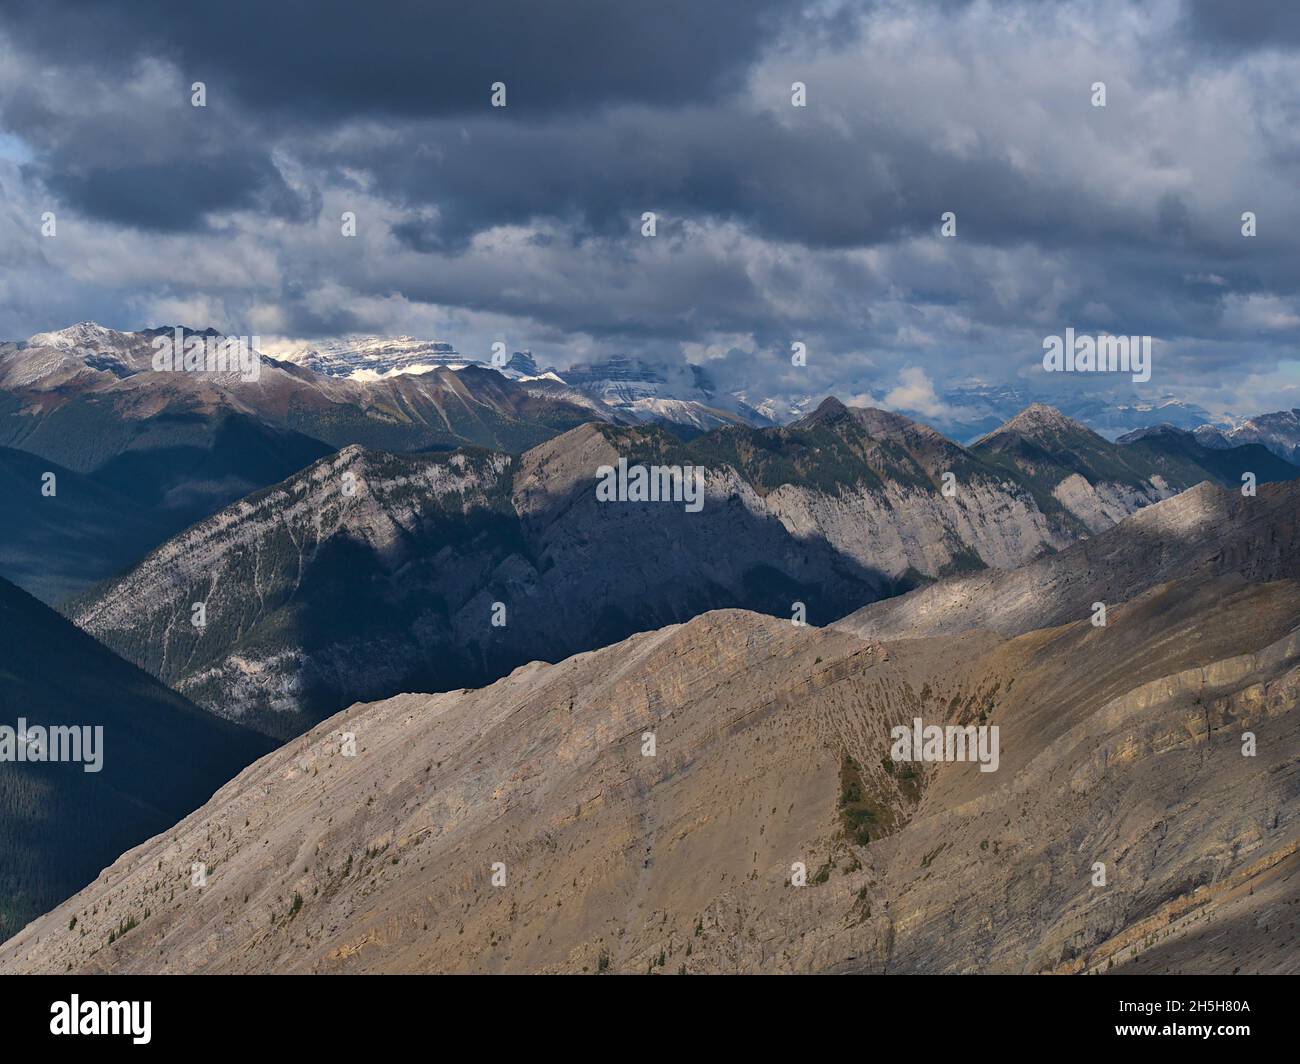 Stunning view over the rough Rocky Mountains near Canmore, Kananaskis Country, Alberta, Canada with the snowy peaks of Sundance Range. Stock Photo